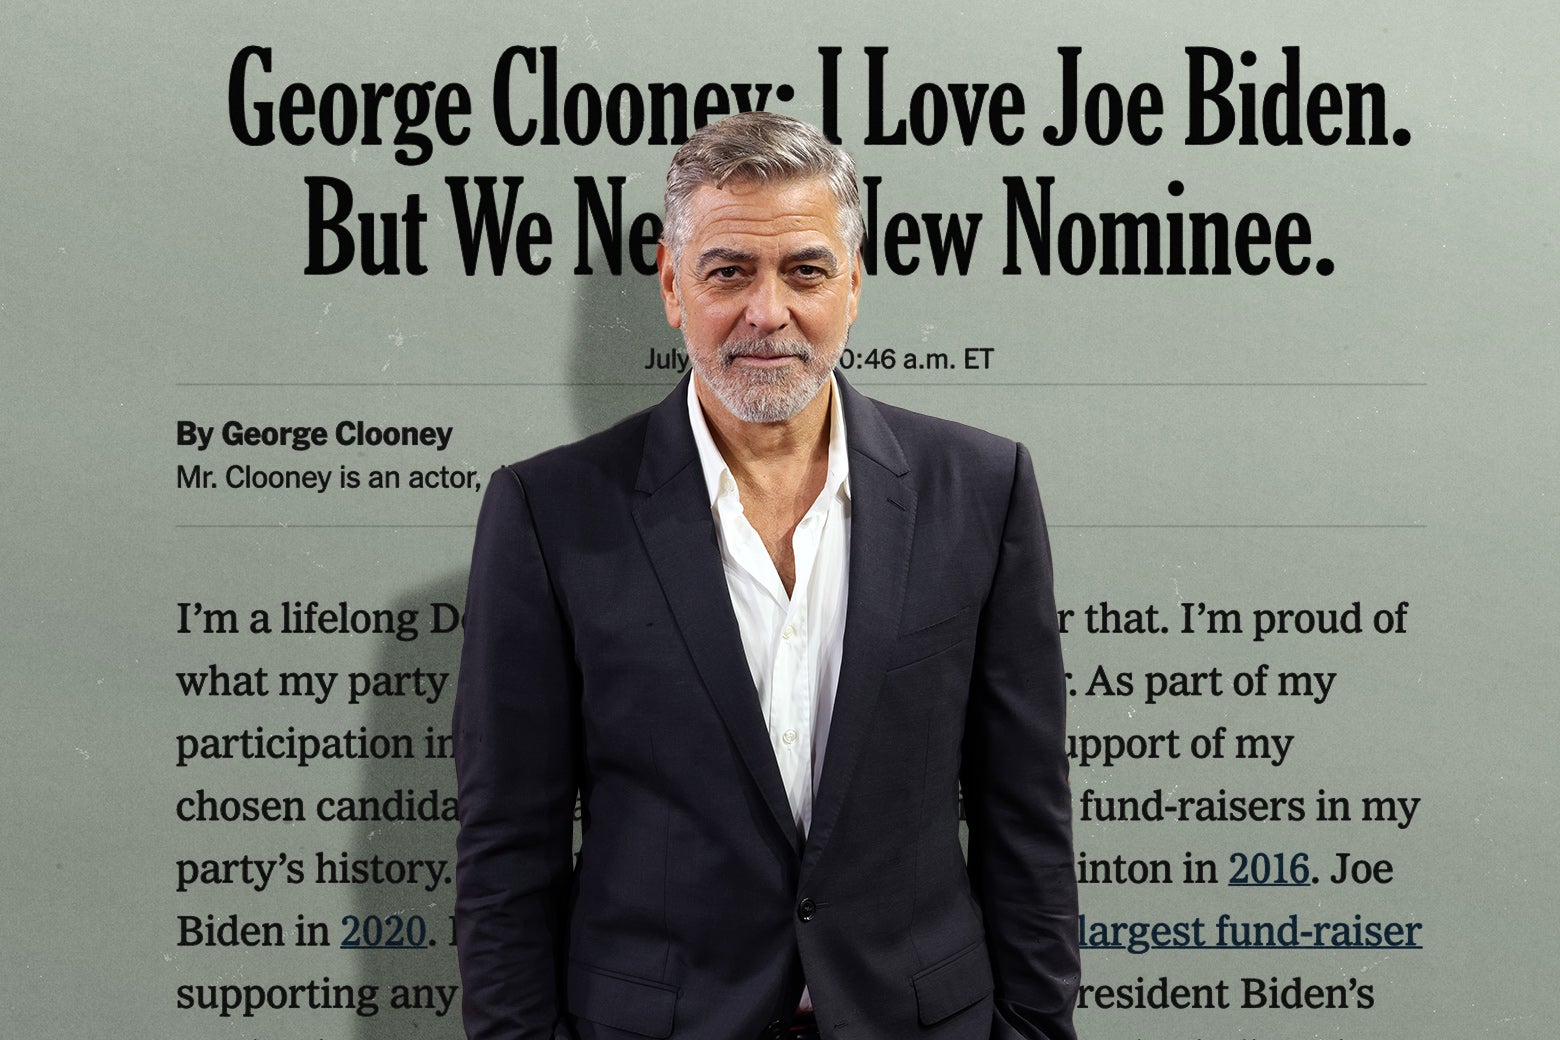 Unfortunately, the George Clooney Op-Ed Was Really Good